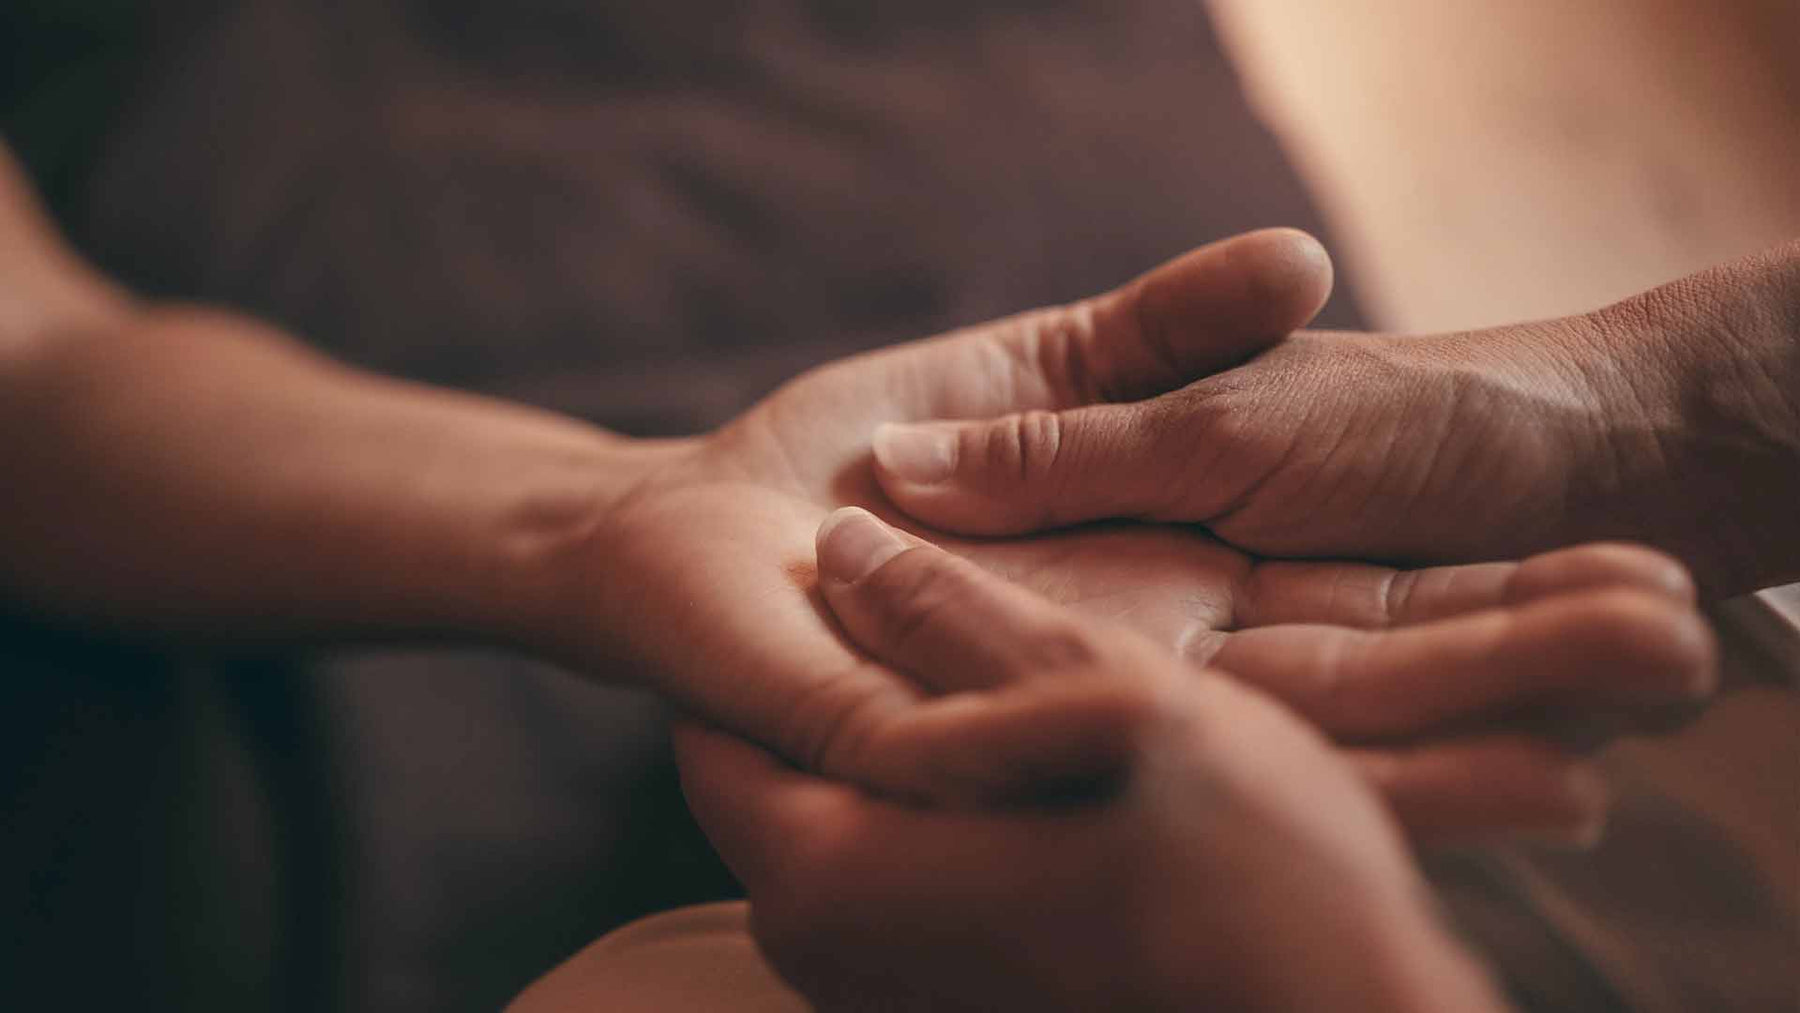 Physiotherapist performing hand massage on patient